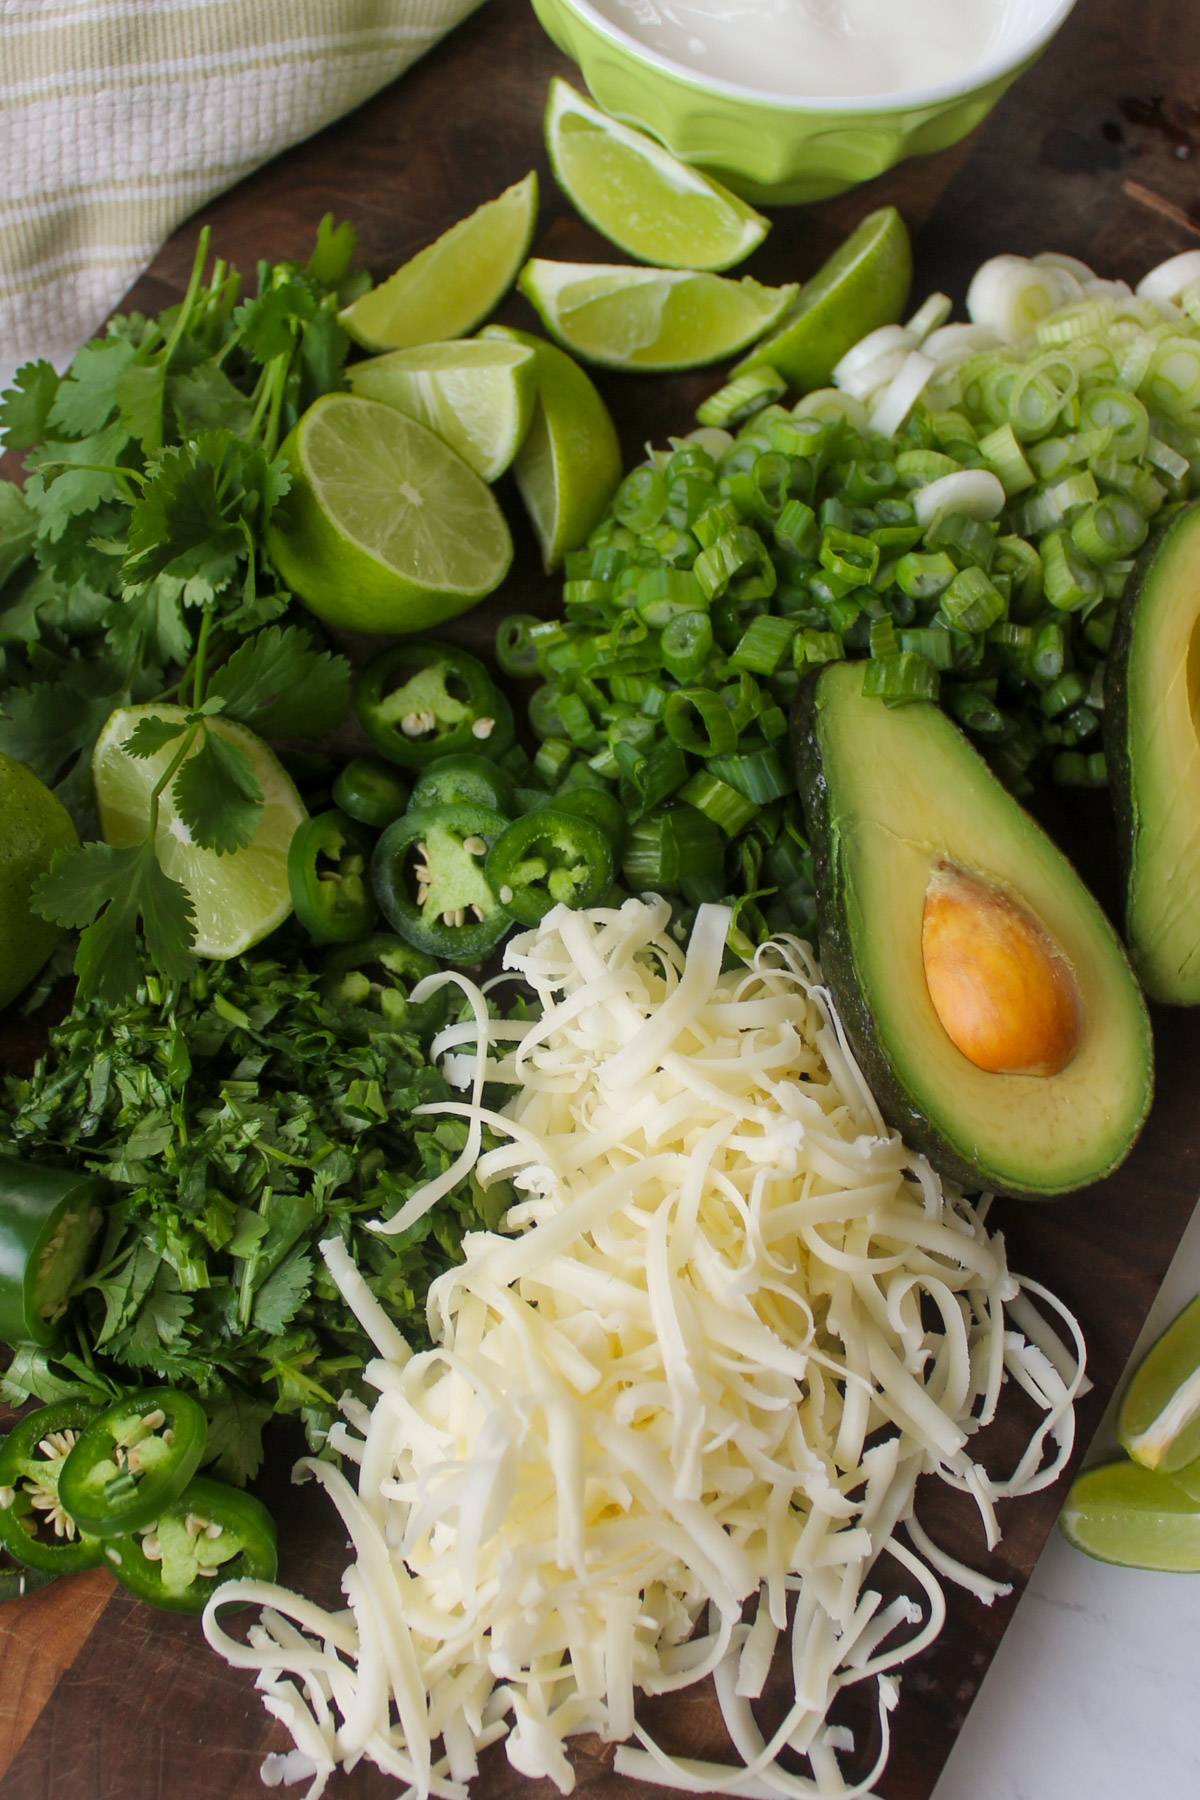 A cutting board with chili toppings like avocado, white shredded cheese, lime wedges, scallions, cilantro and jalapeno.